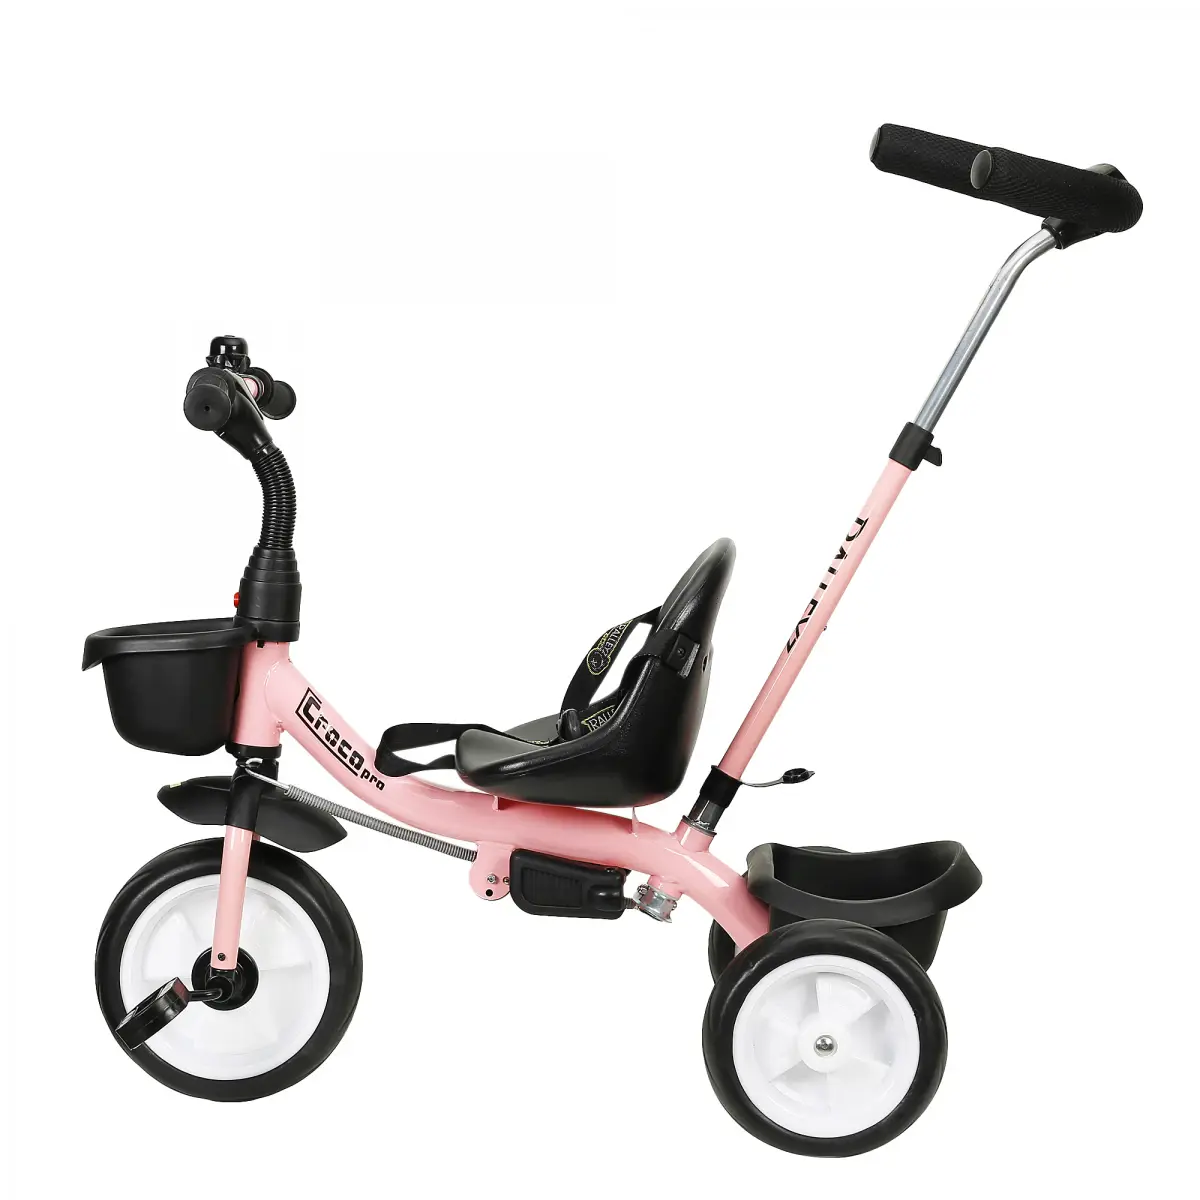 Ralleyz Tricycle Plug N Play Kids/Baby Tricycle with Parental Control, Cushion seat, For Boys & Girls, Kids for 2Y+, Pink